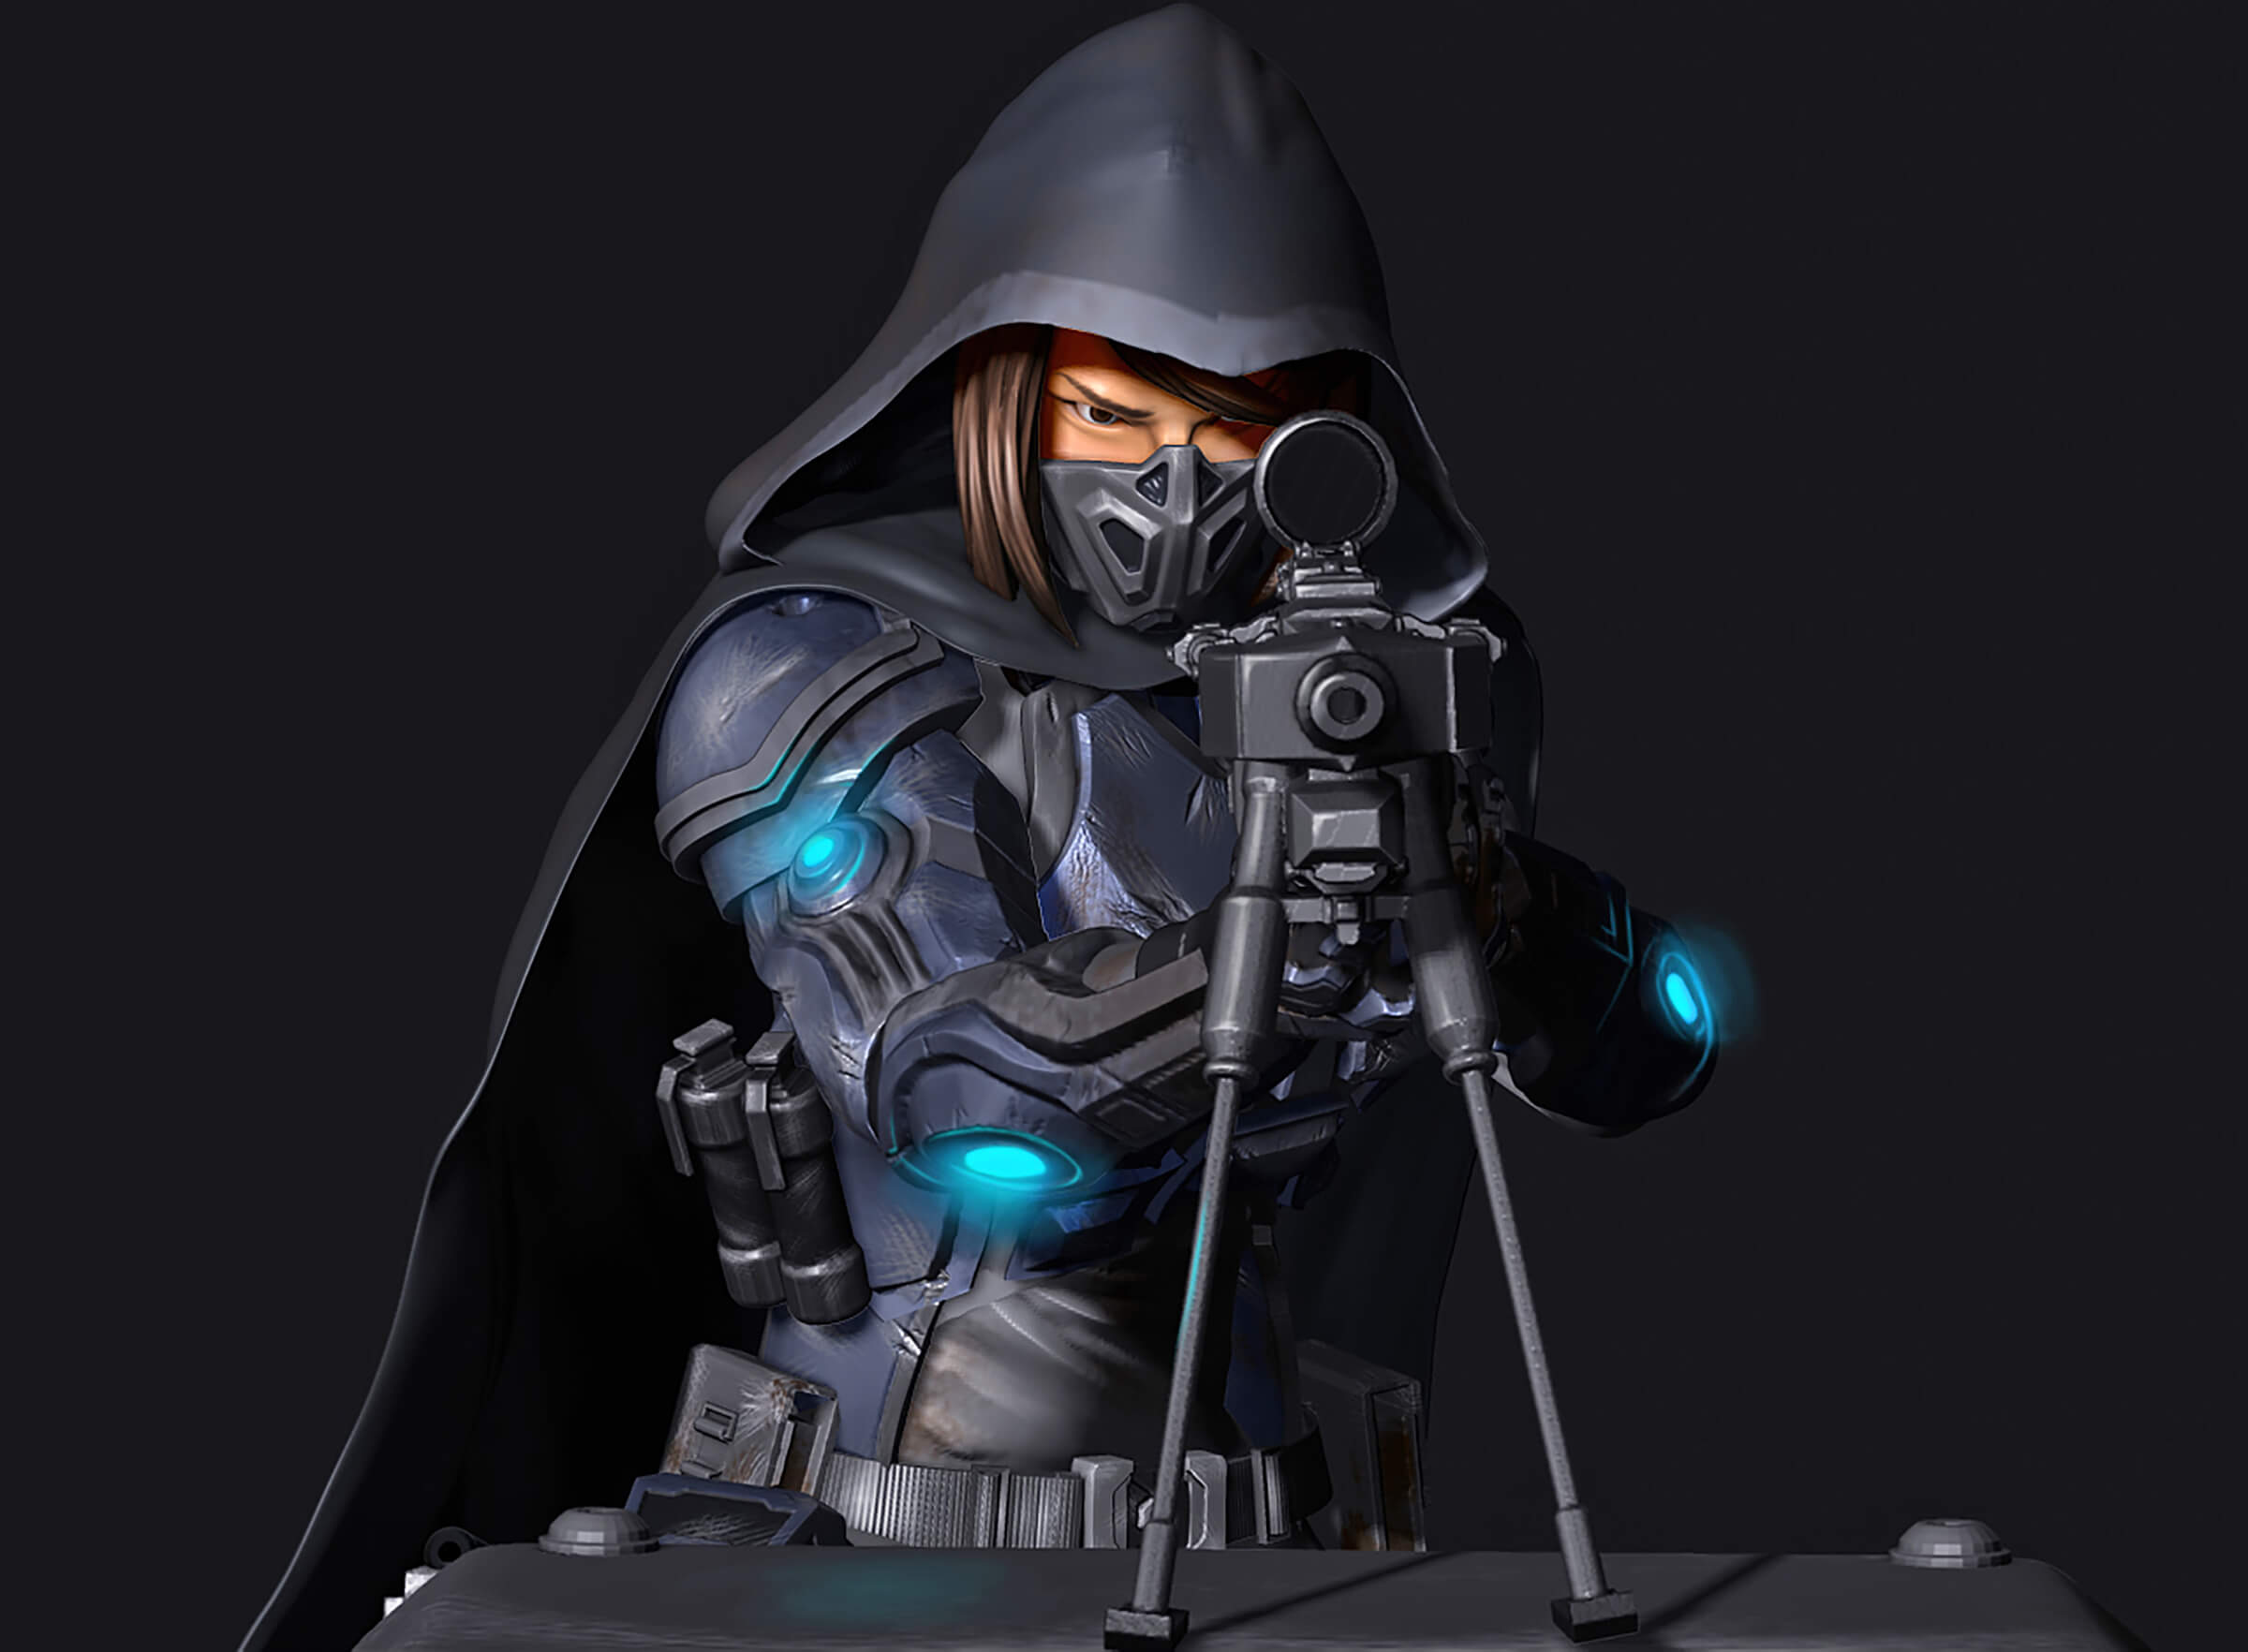 computer-generated 3D model of a sniper character taking aim at the viewer